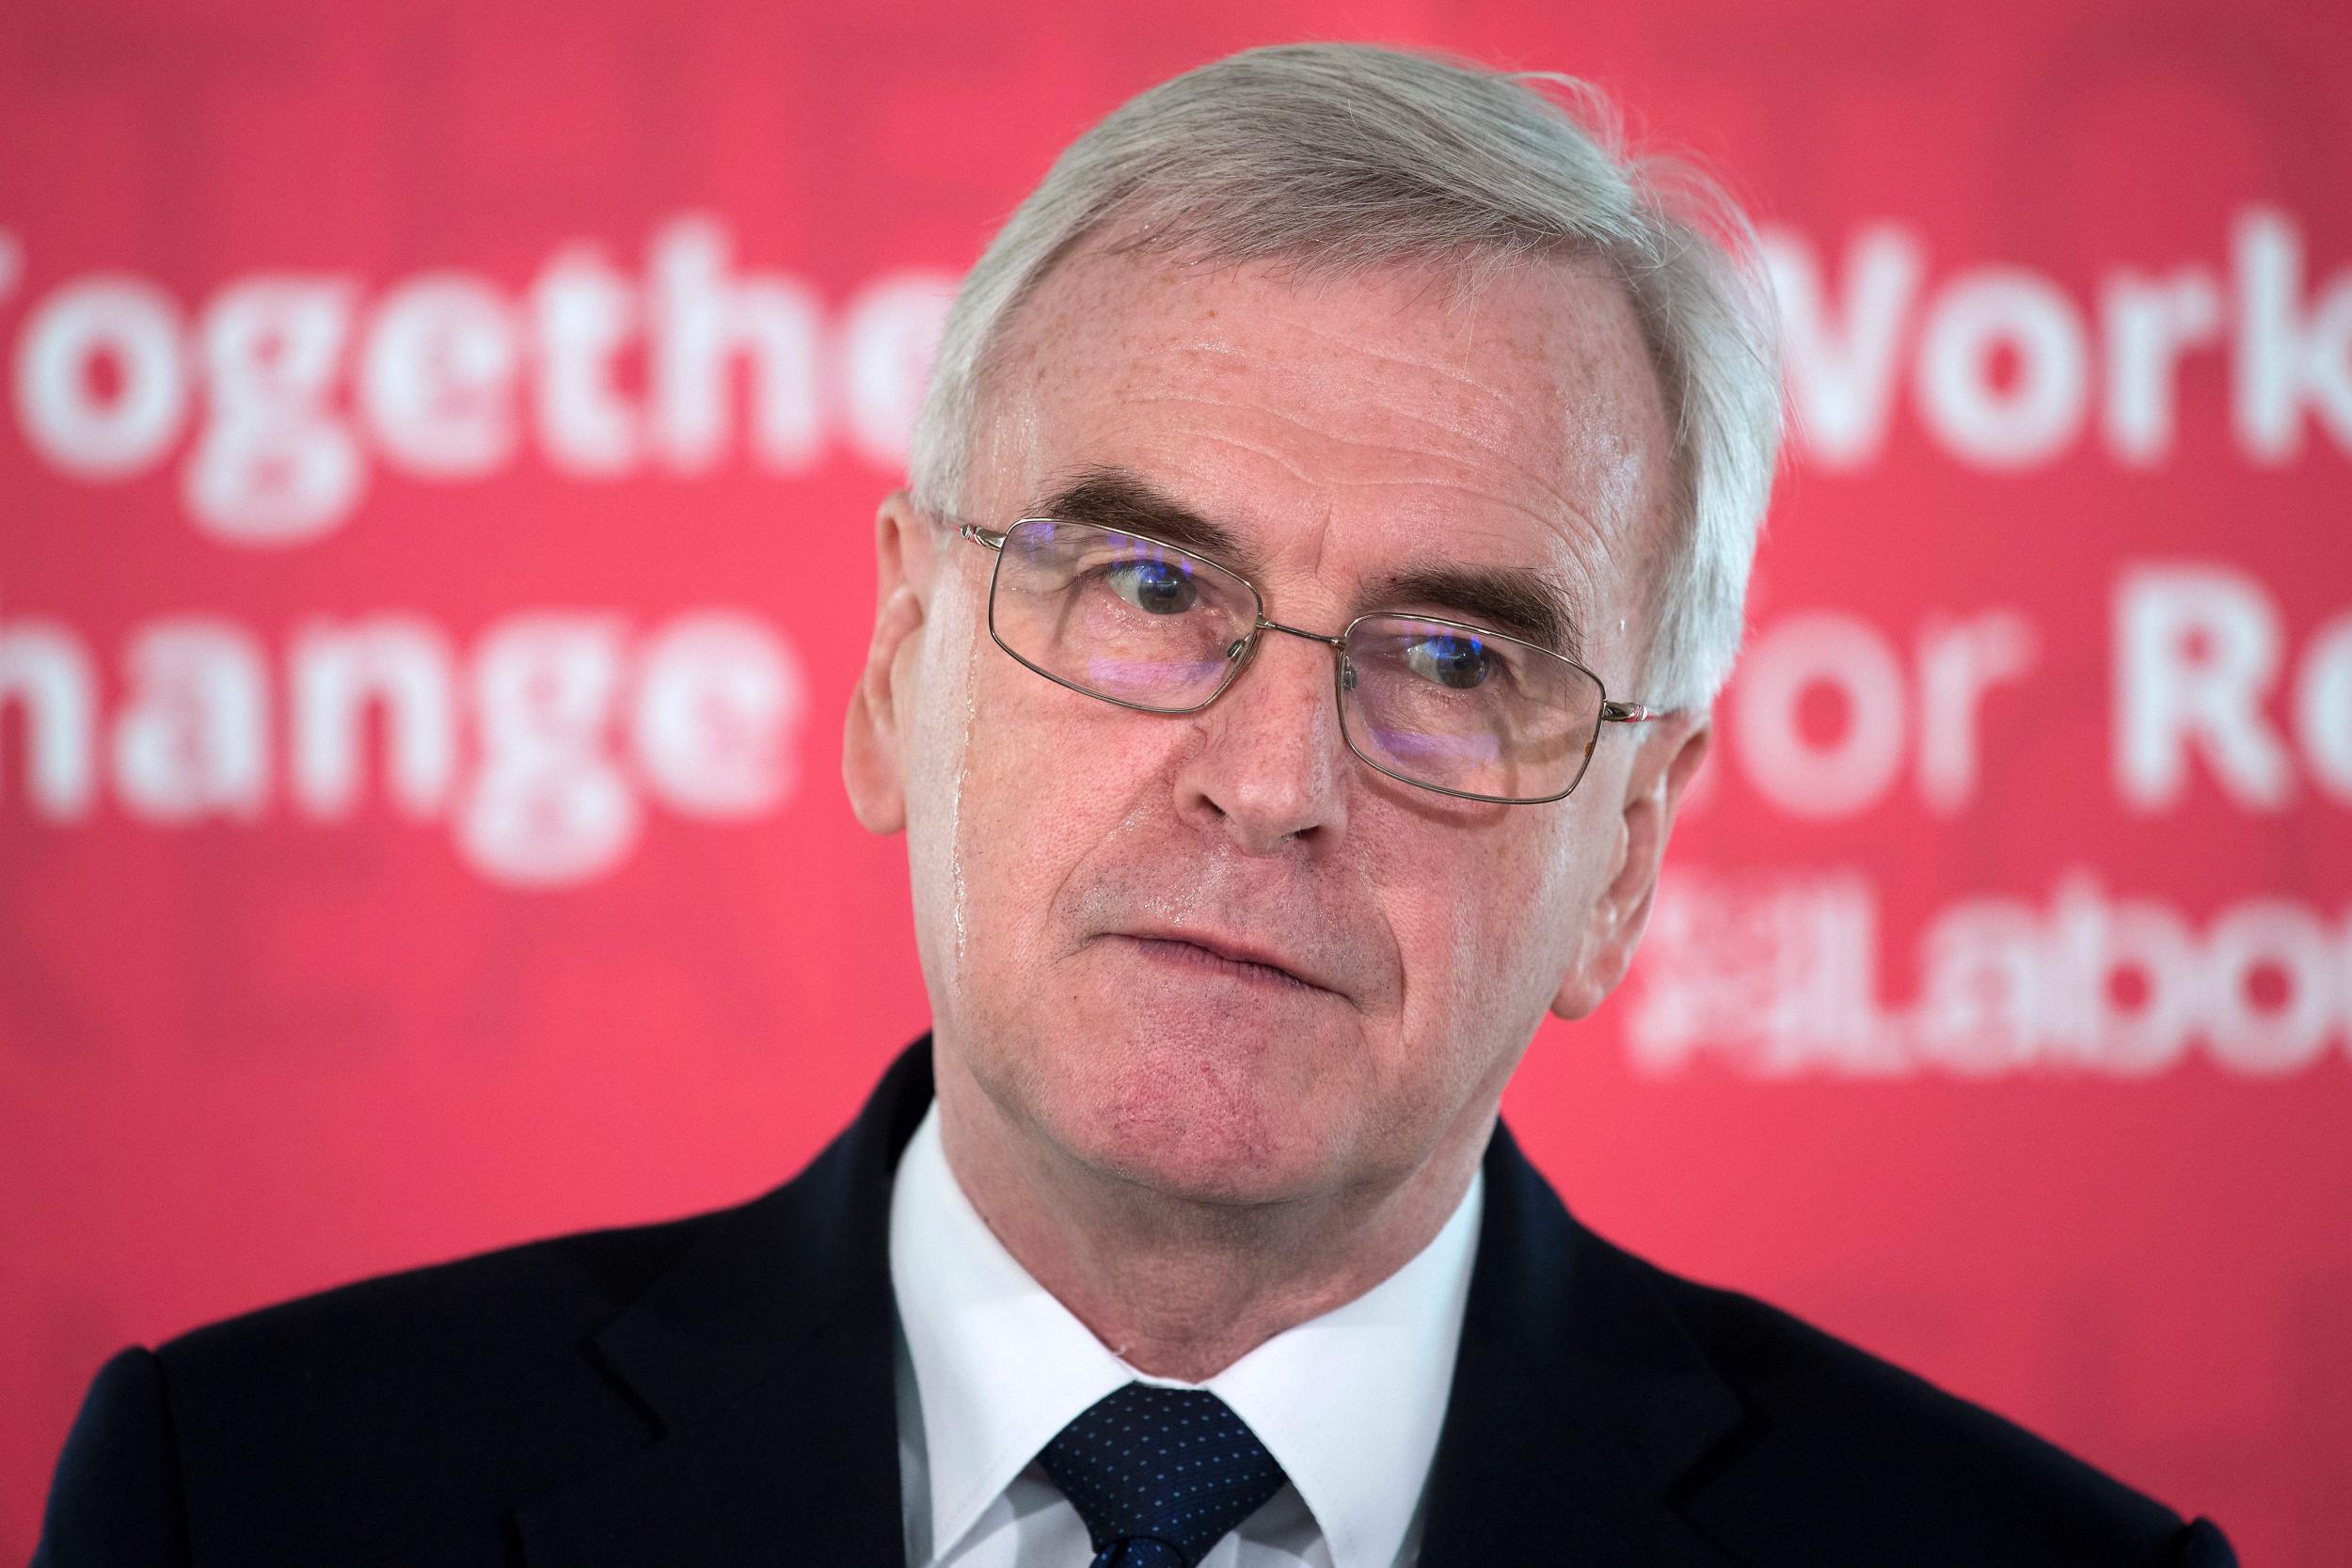 John McDonnell said only his party would stand up for workers and small businesses to make the tax system fair